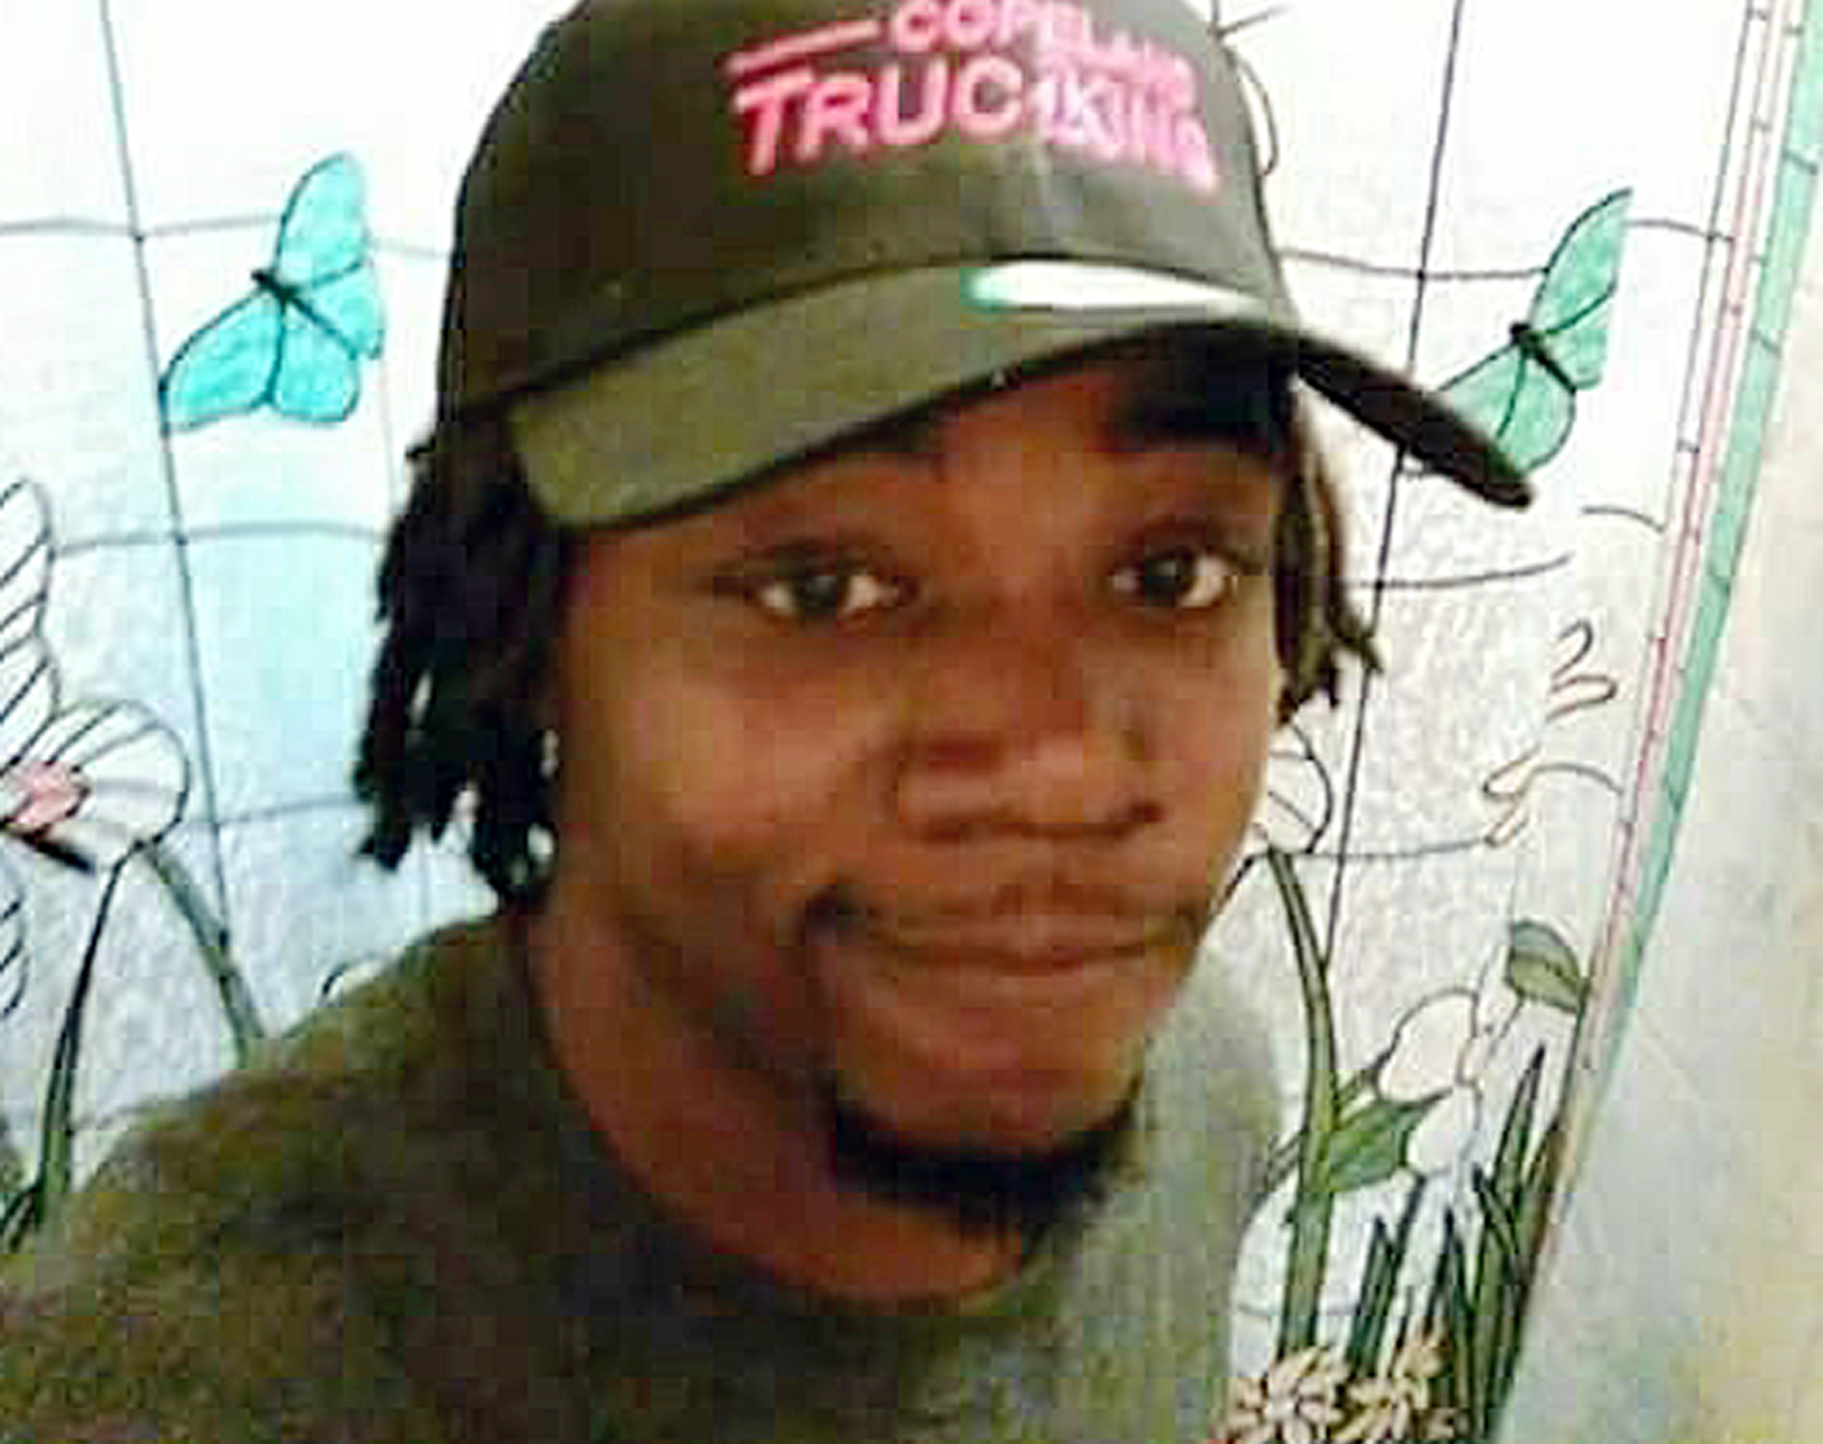 This undated photo released by his sister Javille Burns shows Jamar Clark, who was fatally shot in a confrontation with police on Sunday, Nov. 15, 2015, in Minneapolis. Javille Burns via AP 2015